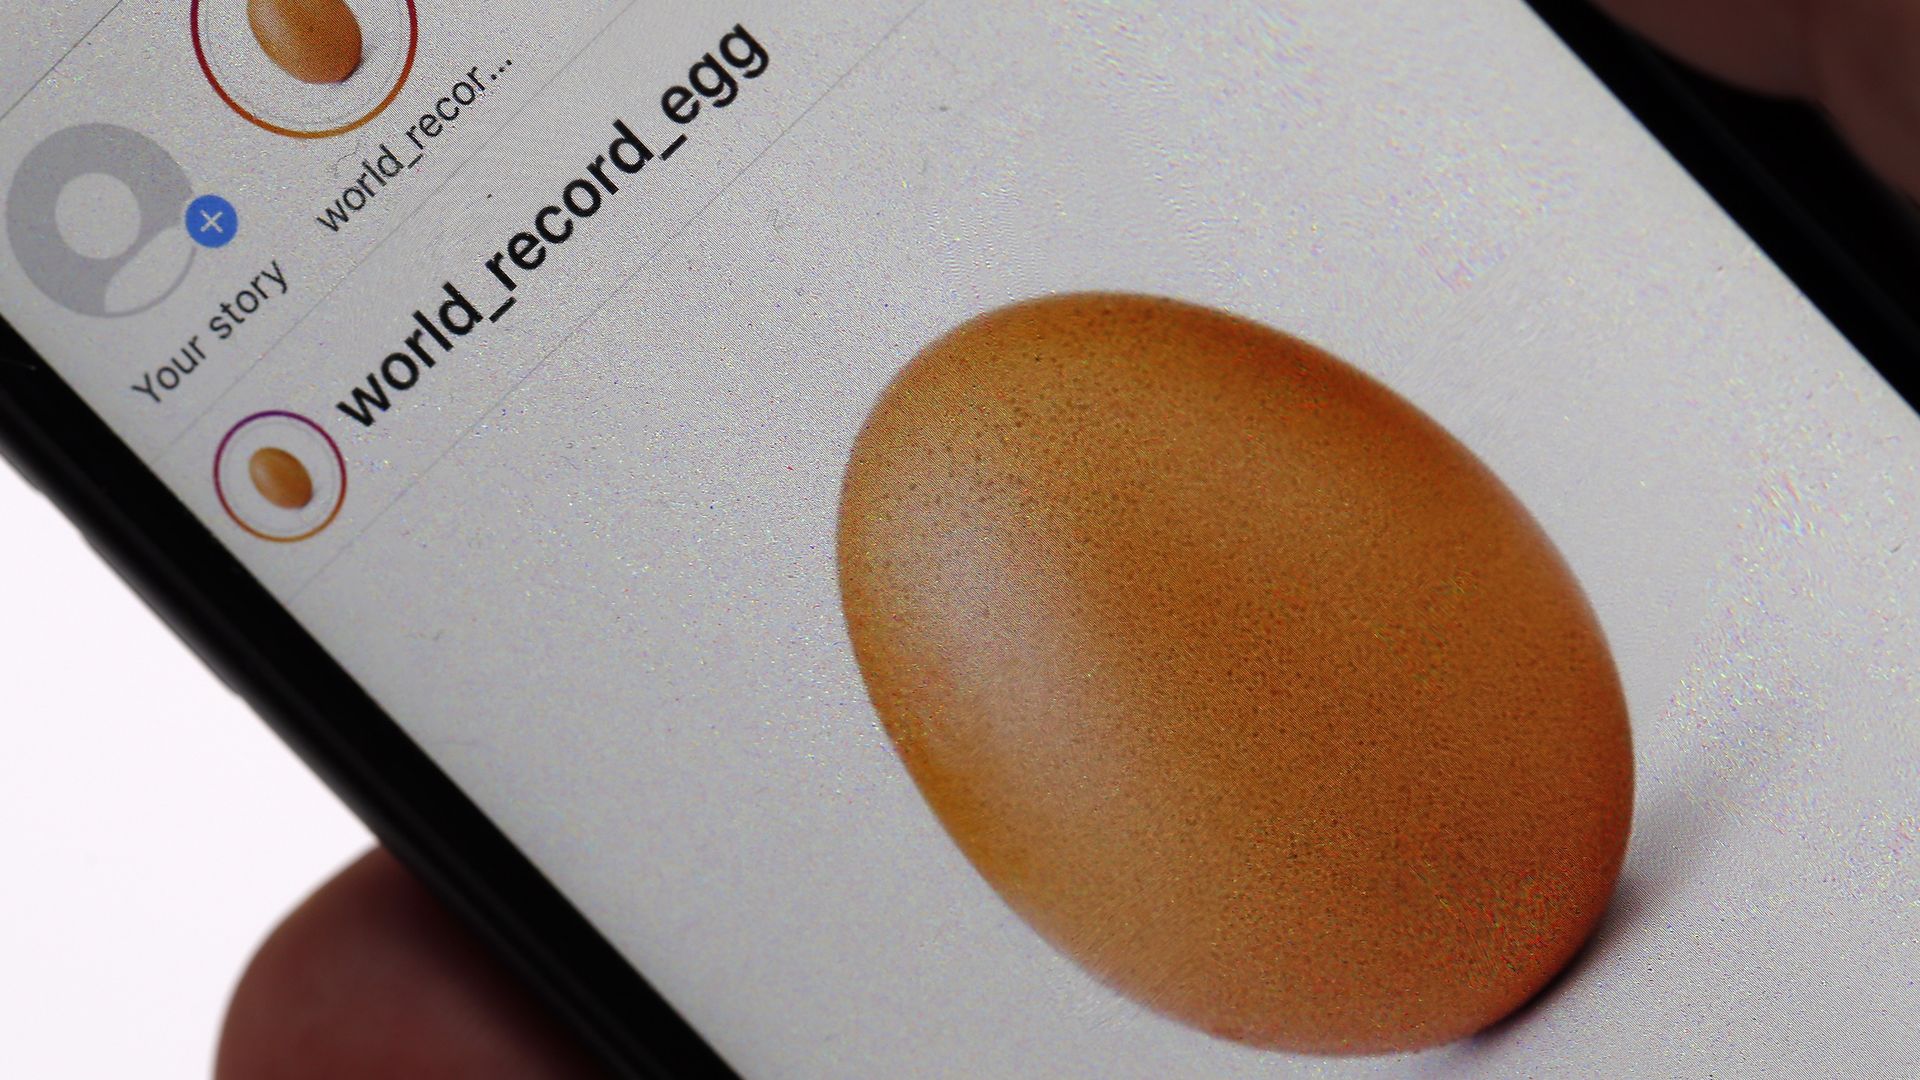 In this illustration photo, a mobile phone shows the image of an egg which was posted on the Instagram social network on January 14, 2019 in Paris, France